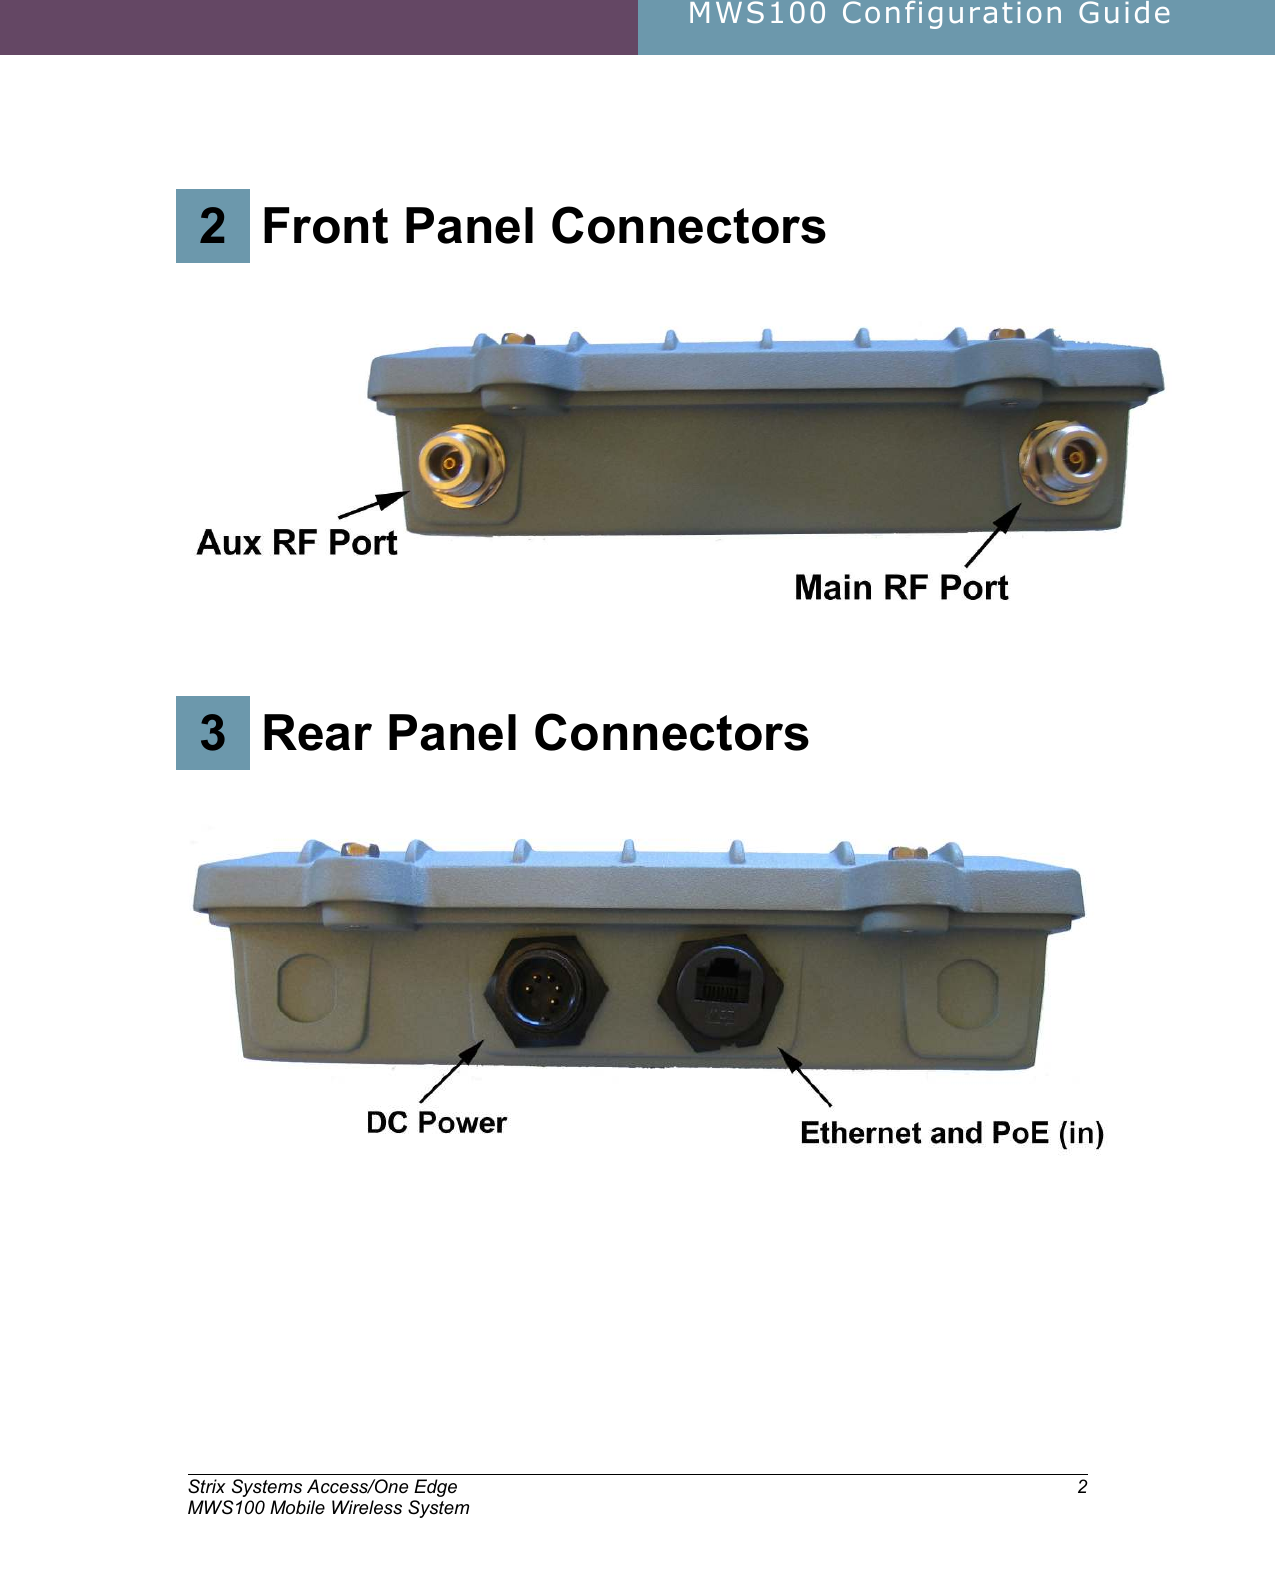     MWS100 Configuration Guide        Strix Systems Access/One Edge MWS100 Mobile Wireless System 22.  Front Panel Indicators 2 Front Panel Connectors    3 Rear Panel Connectors     